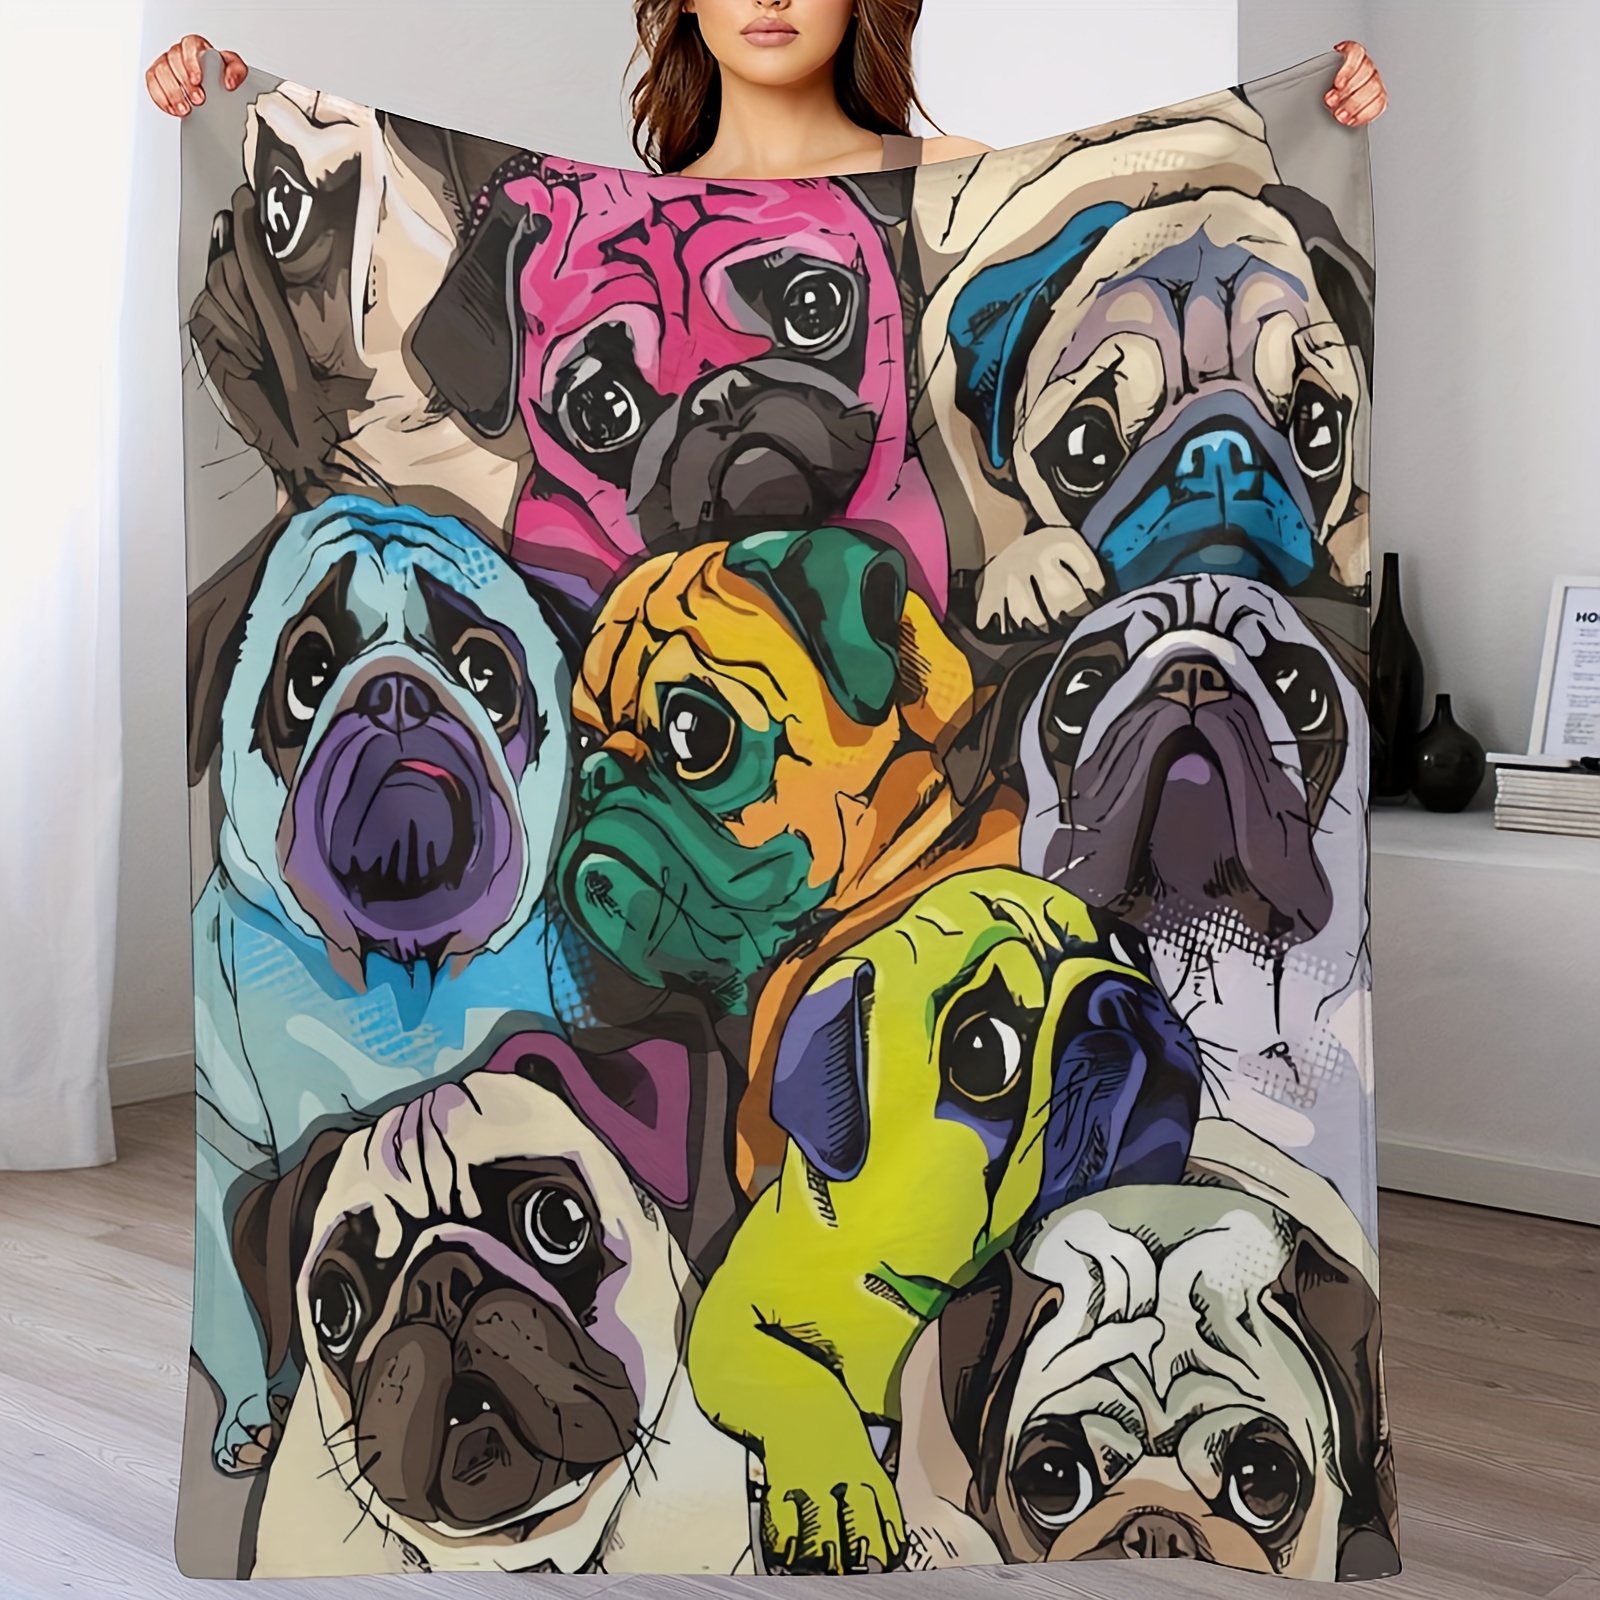 

Flannel Fleece Throw Blanket Colorful Pug Dogs Funny Puppy Pillowcase Cover Microfiber Durable Couch Blankets Home Decor Perfect For Bed And Sofa Super Soft Warm Blankets For All Season